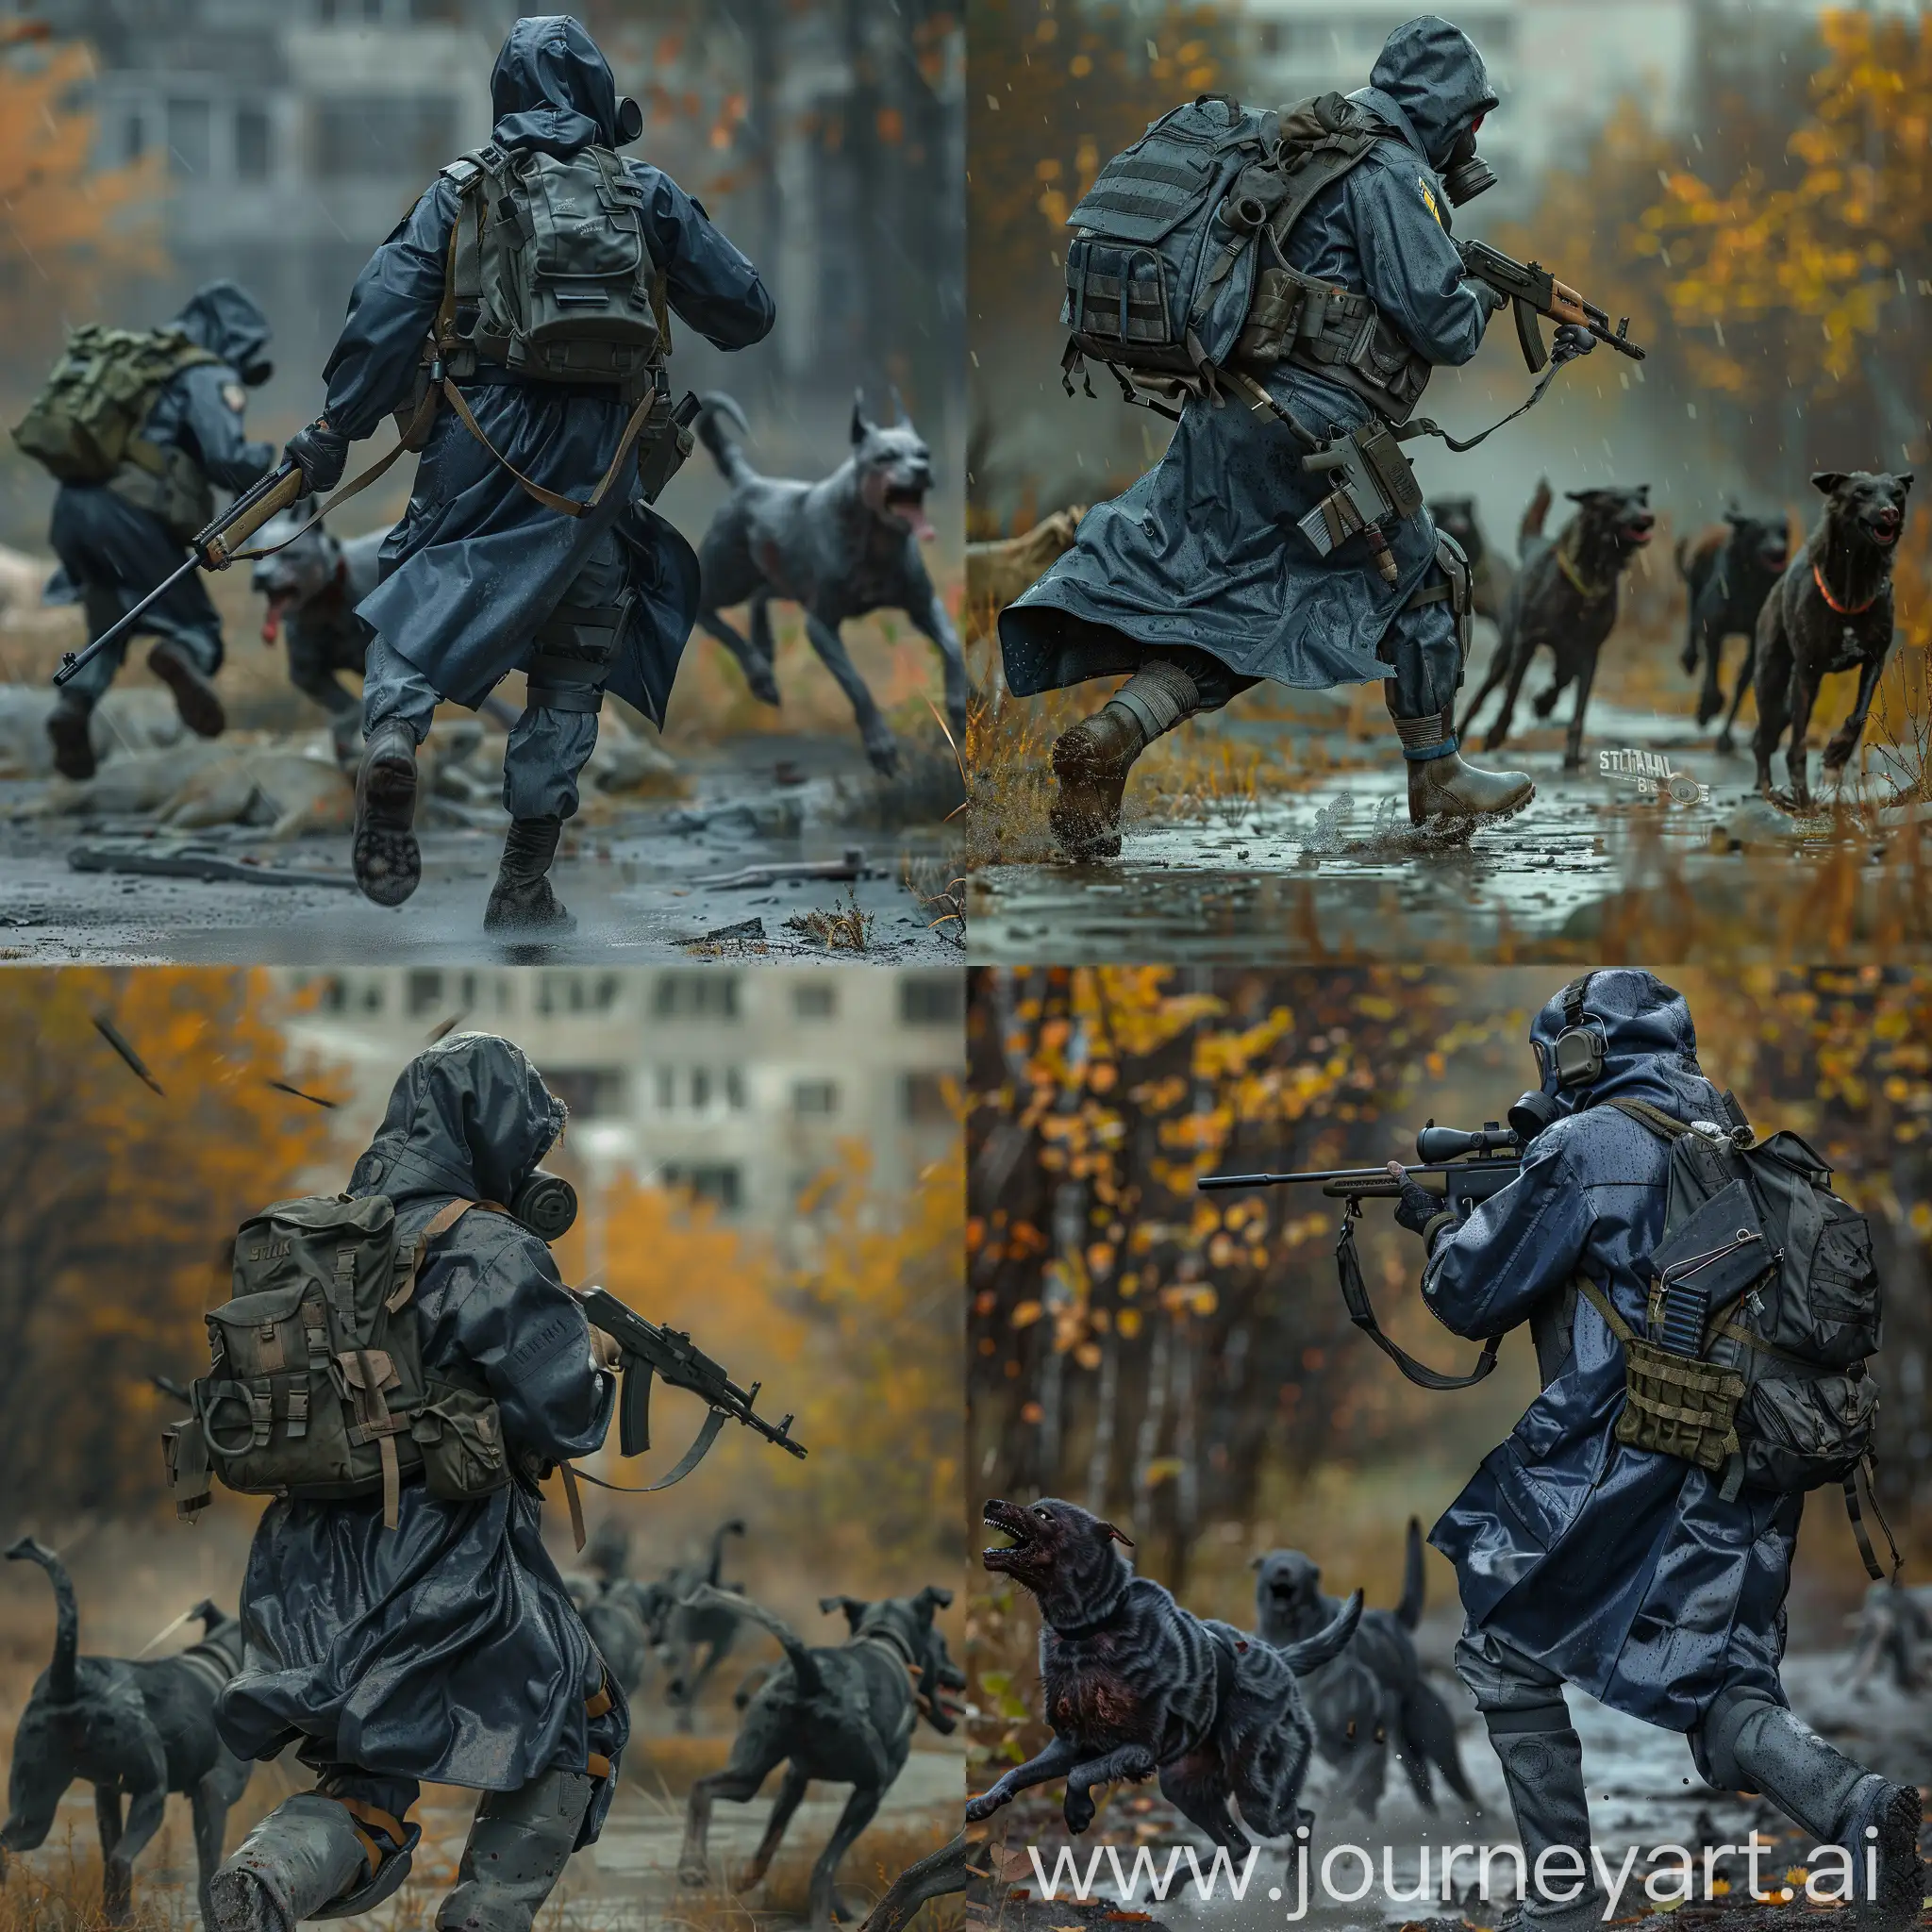 a mercenary from the universe of S.T.A.L.K.E.R., a mercenary dressed in a dark blue military raincoat, gray military armor on his body, a gas mask on his face, a small military backpack on his back, a sniper rifle in his hands, a mercenary running away from a pack of rabid, infected dogs, the Soviet abandoned city of Pripyat, gloomy autumn.